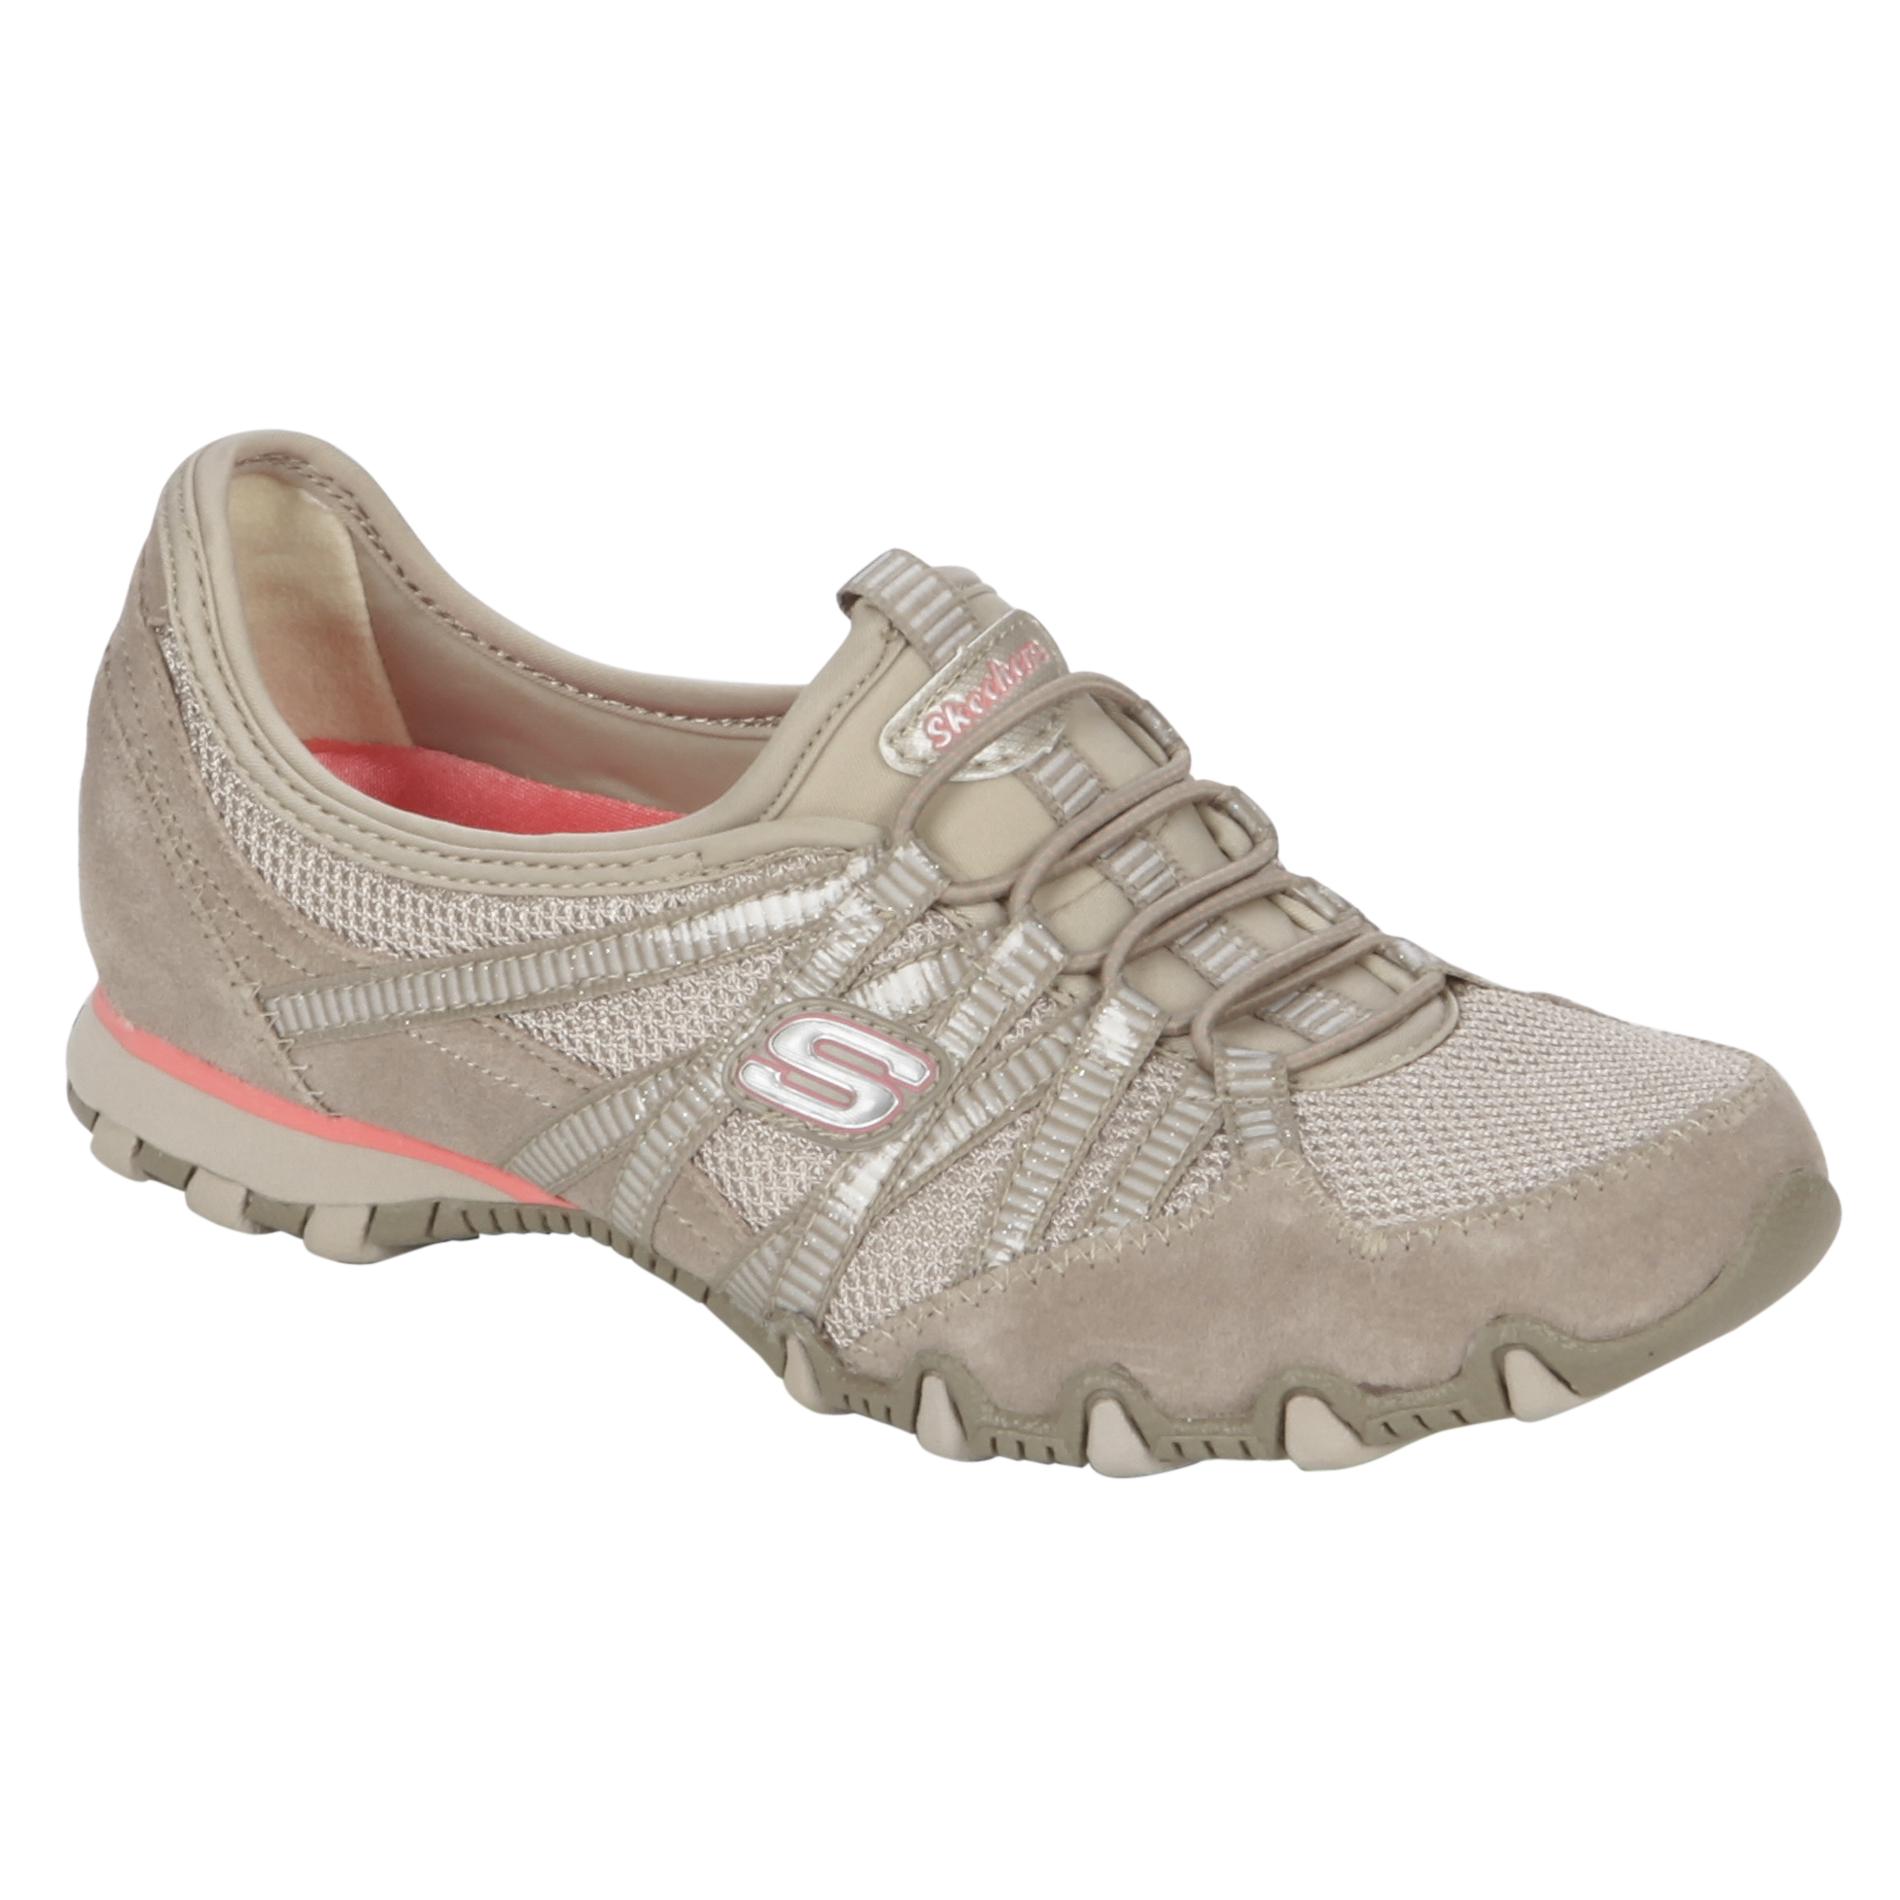 Skechers Women's Hot Ticket Casual Athletic Shoe - Taupe